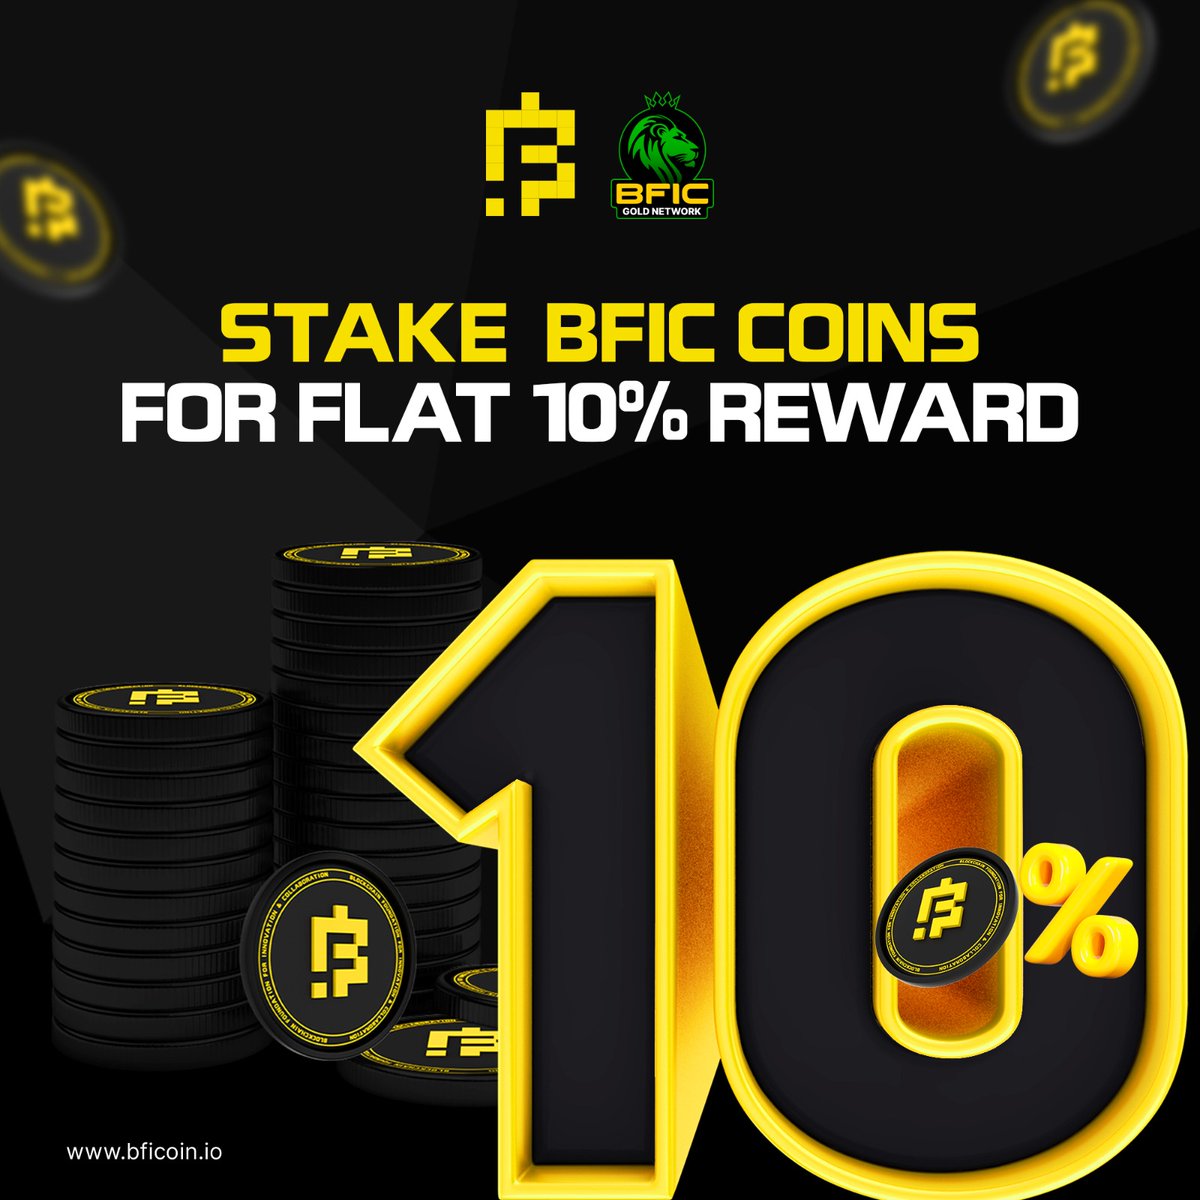 Step into the world of limitless possibilities with the BFIC Gold Network app & 
Experience the power of BFIC coins on the BFIC Gold Network app! 

Unlock a lucrative flat 10% reward by staking BFIC Coins on the BFIC Gold Network!

#BFICGoldNetwork #BFIC #BFICCoin #BFICCommunity